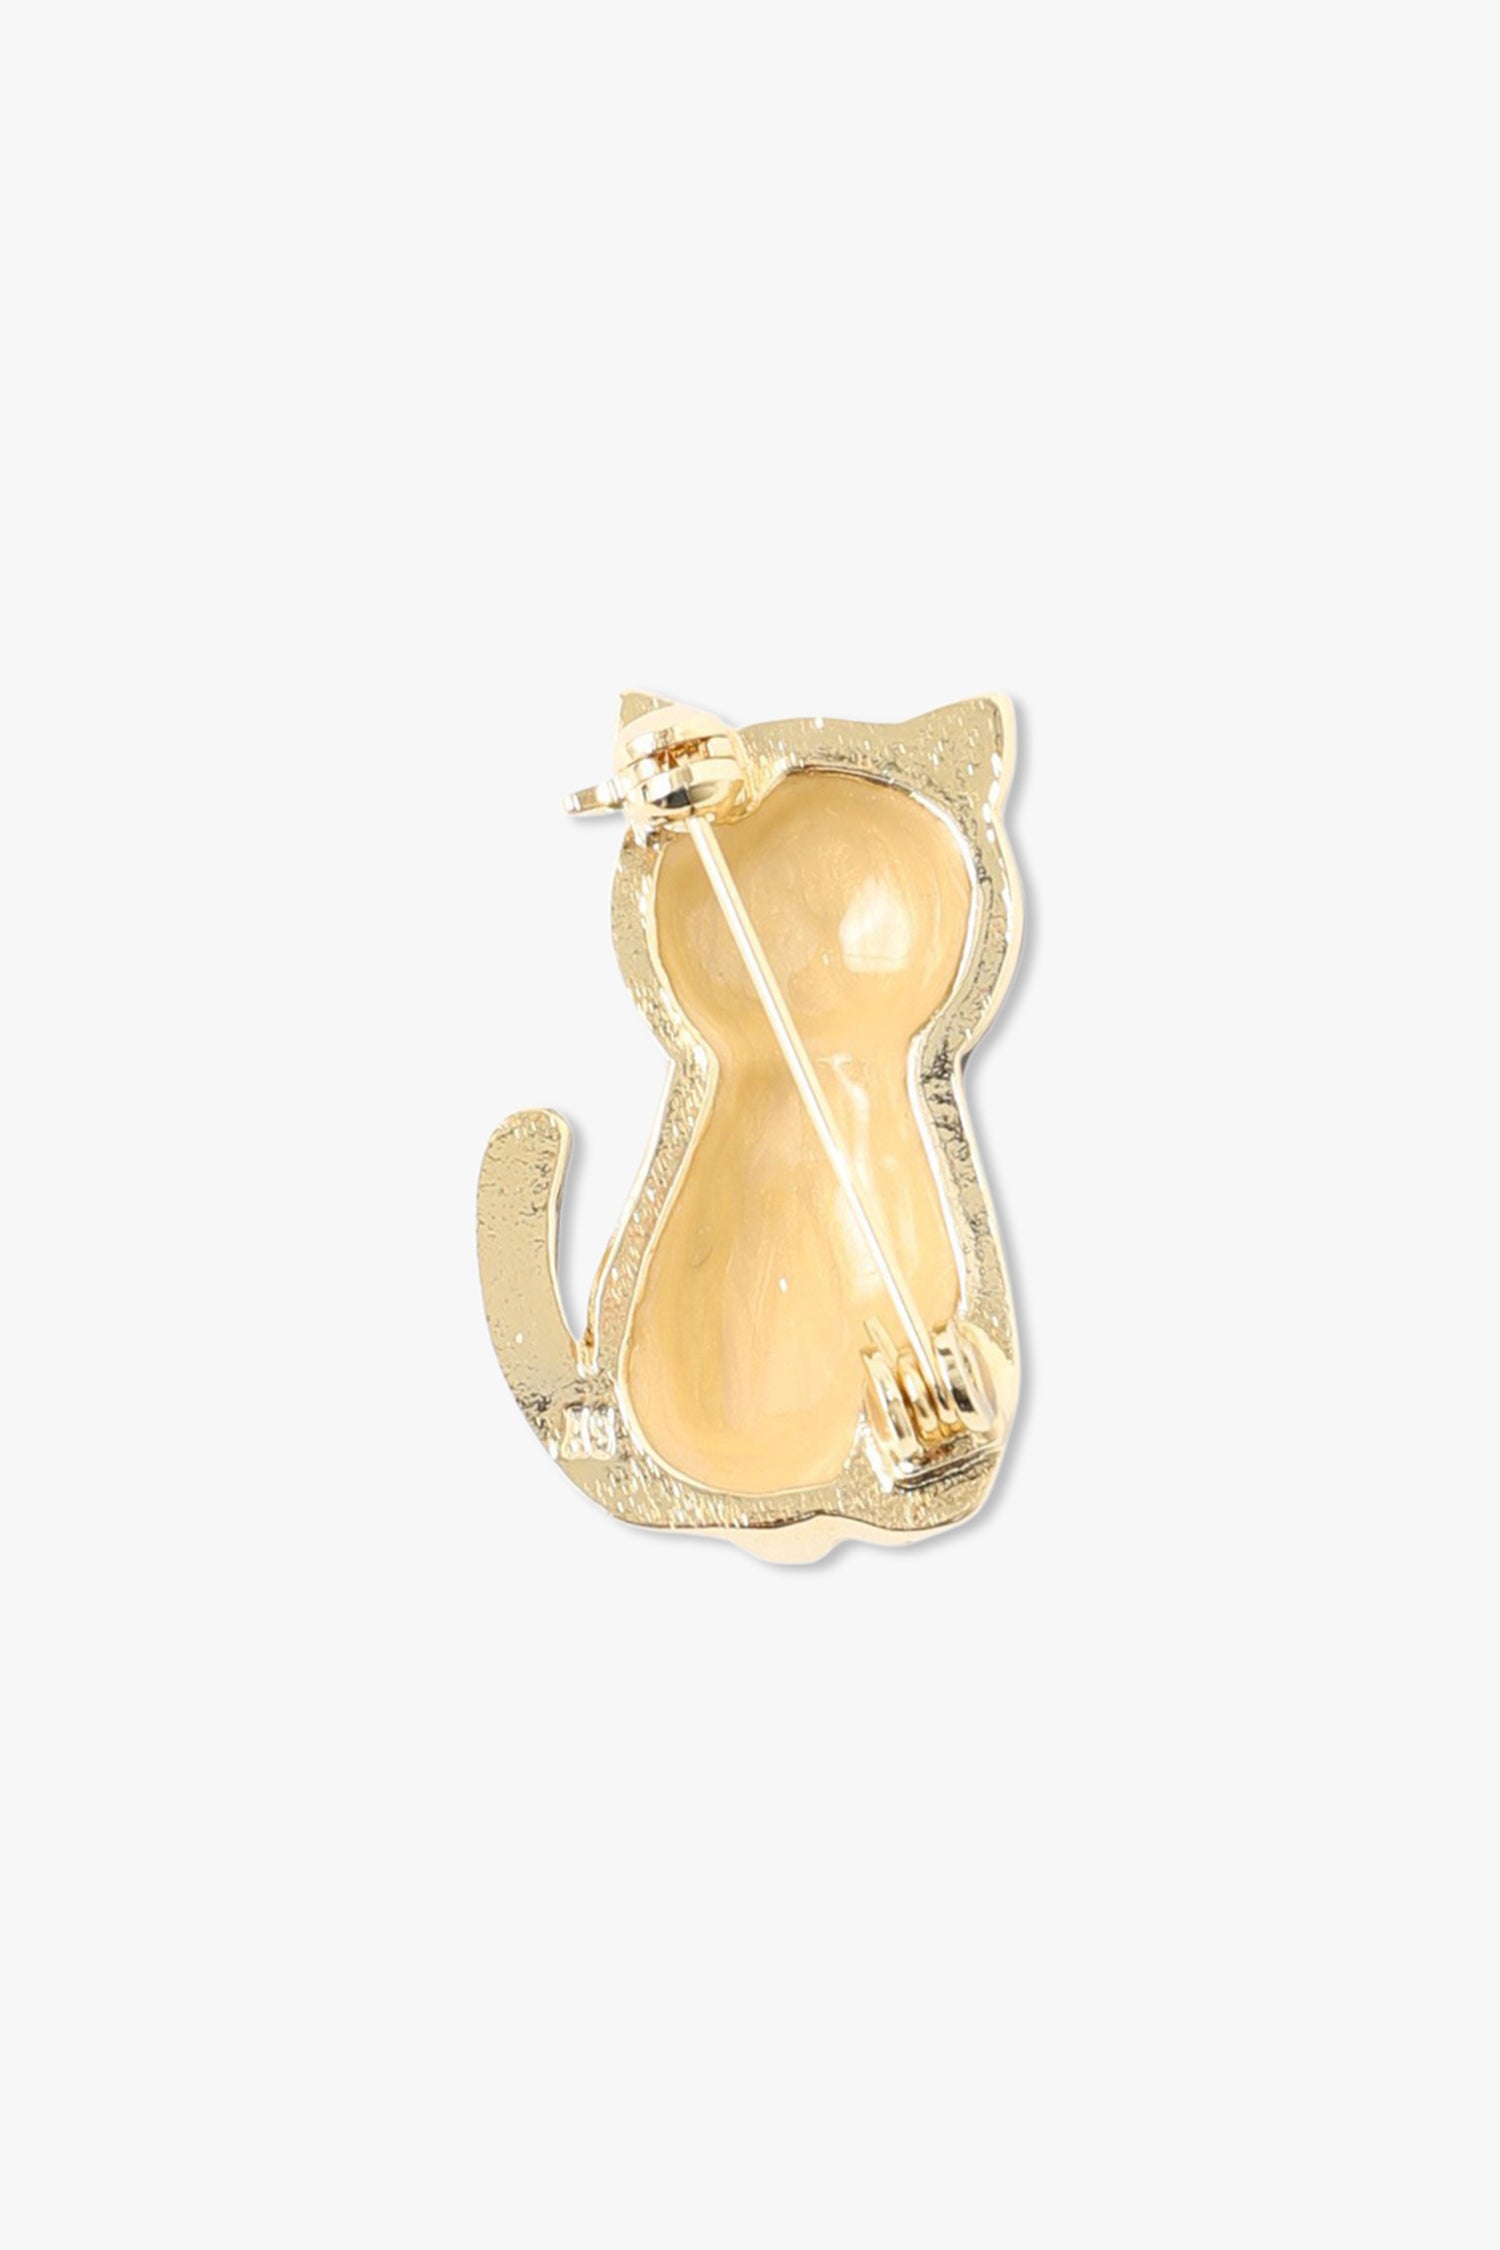 Cat Brooch Black, Metal Yellow gold color plating, with the Brooch pin closure system in diagonal